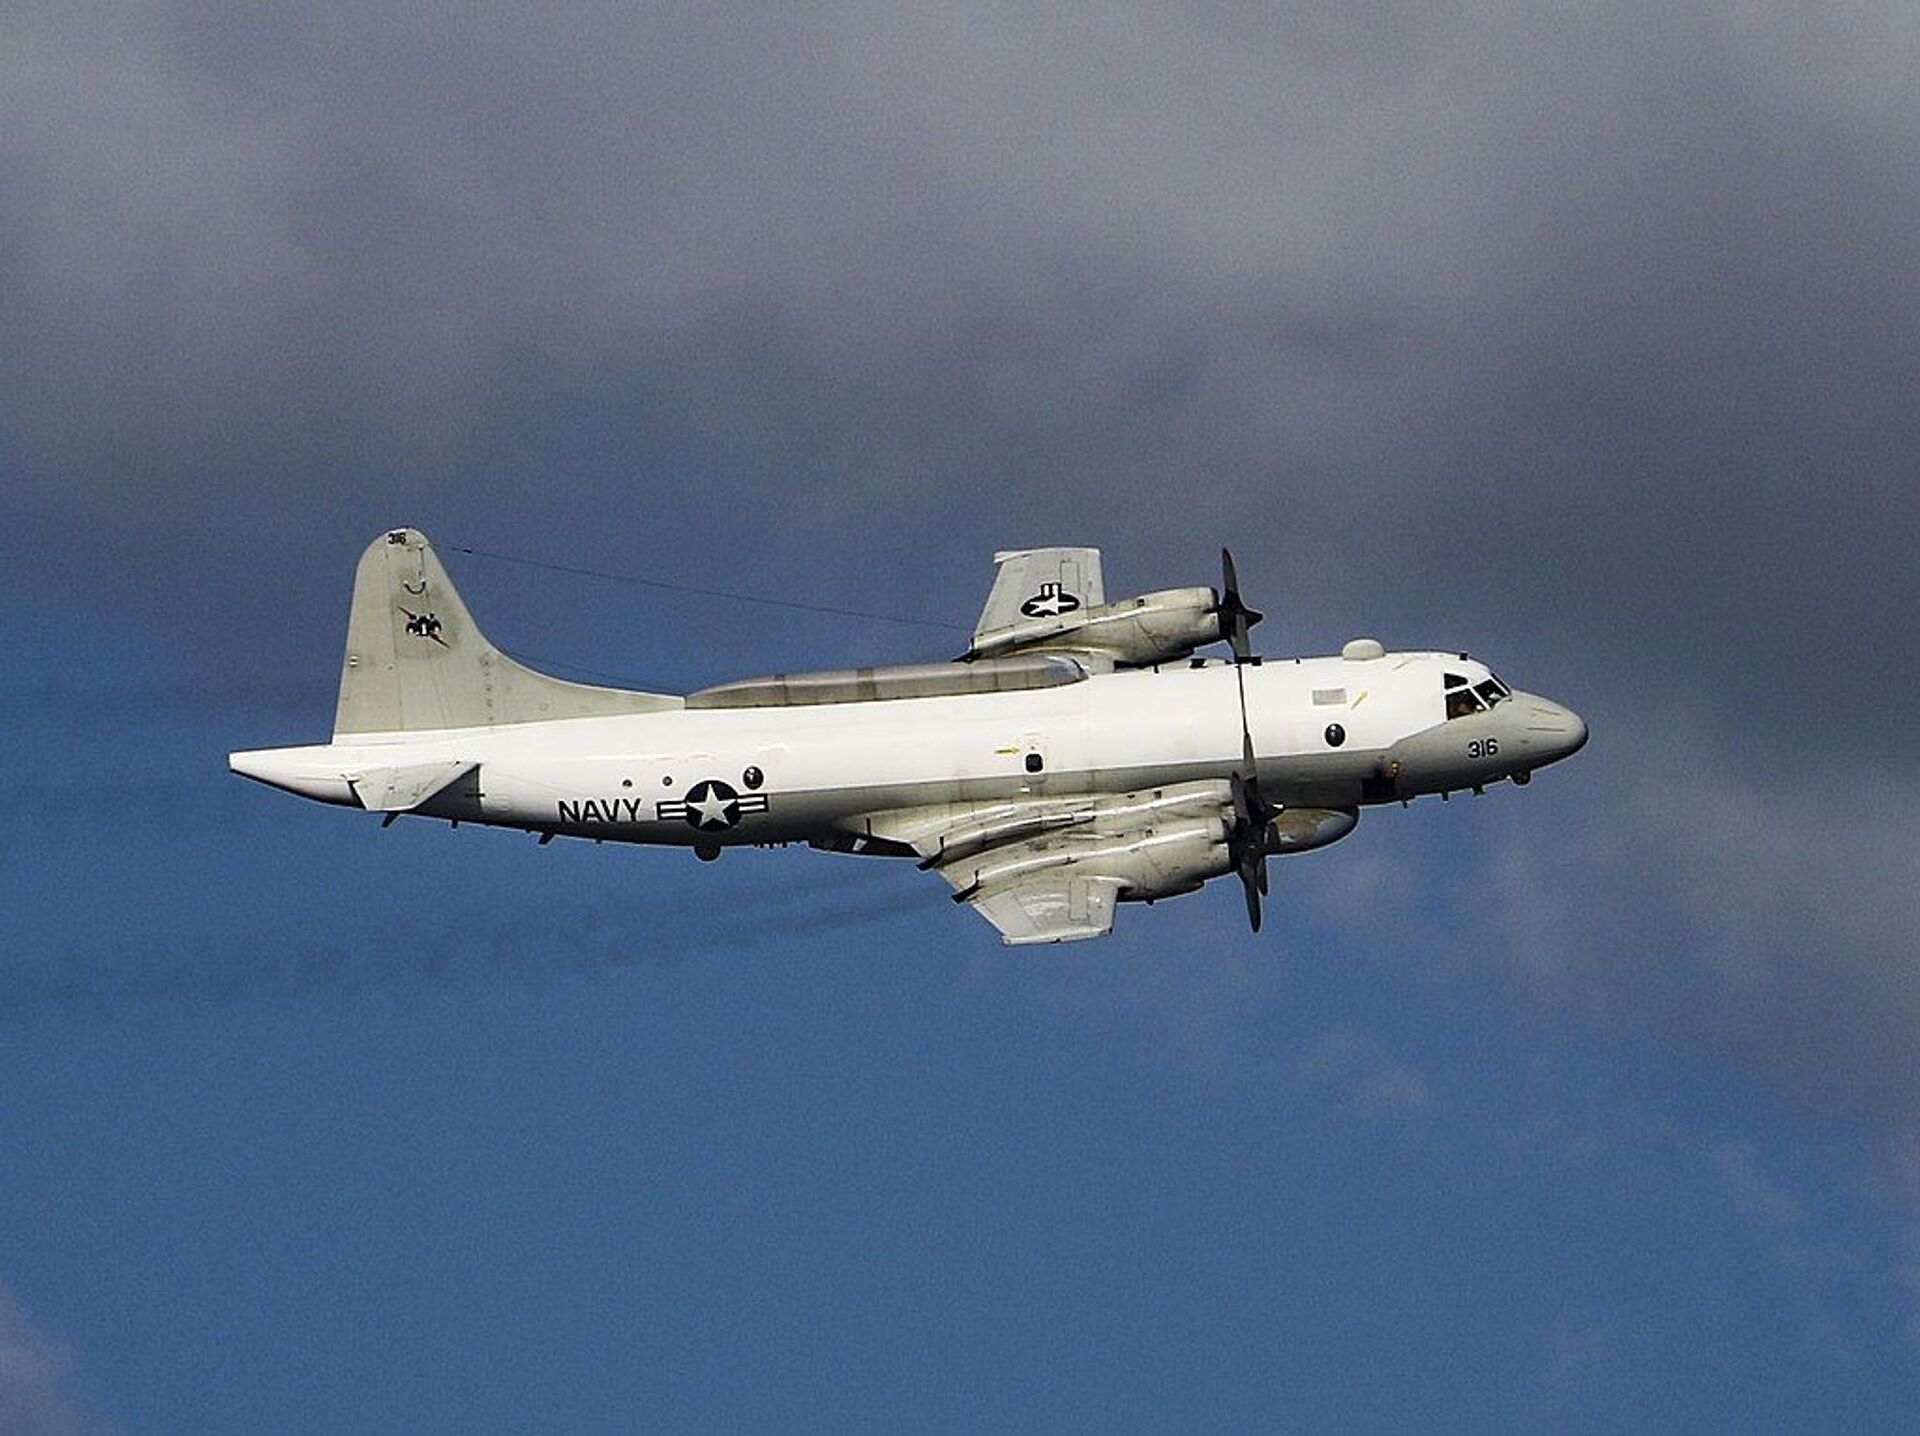 US Flew 65 Spy Plane Sorties Over South China Sea in April, Up 40% in 2021, Report Says - Sputnik International, 1920, 30.04.2021